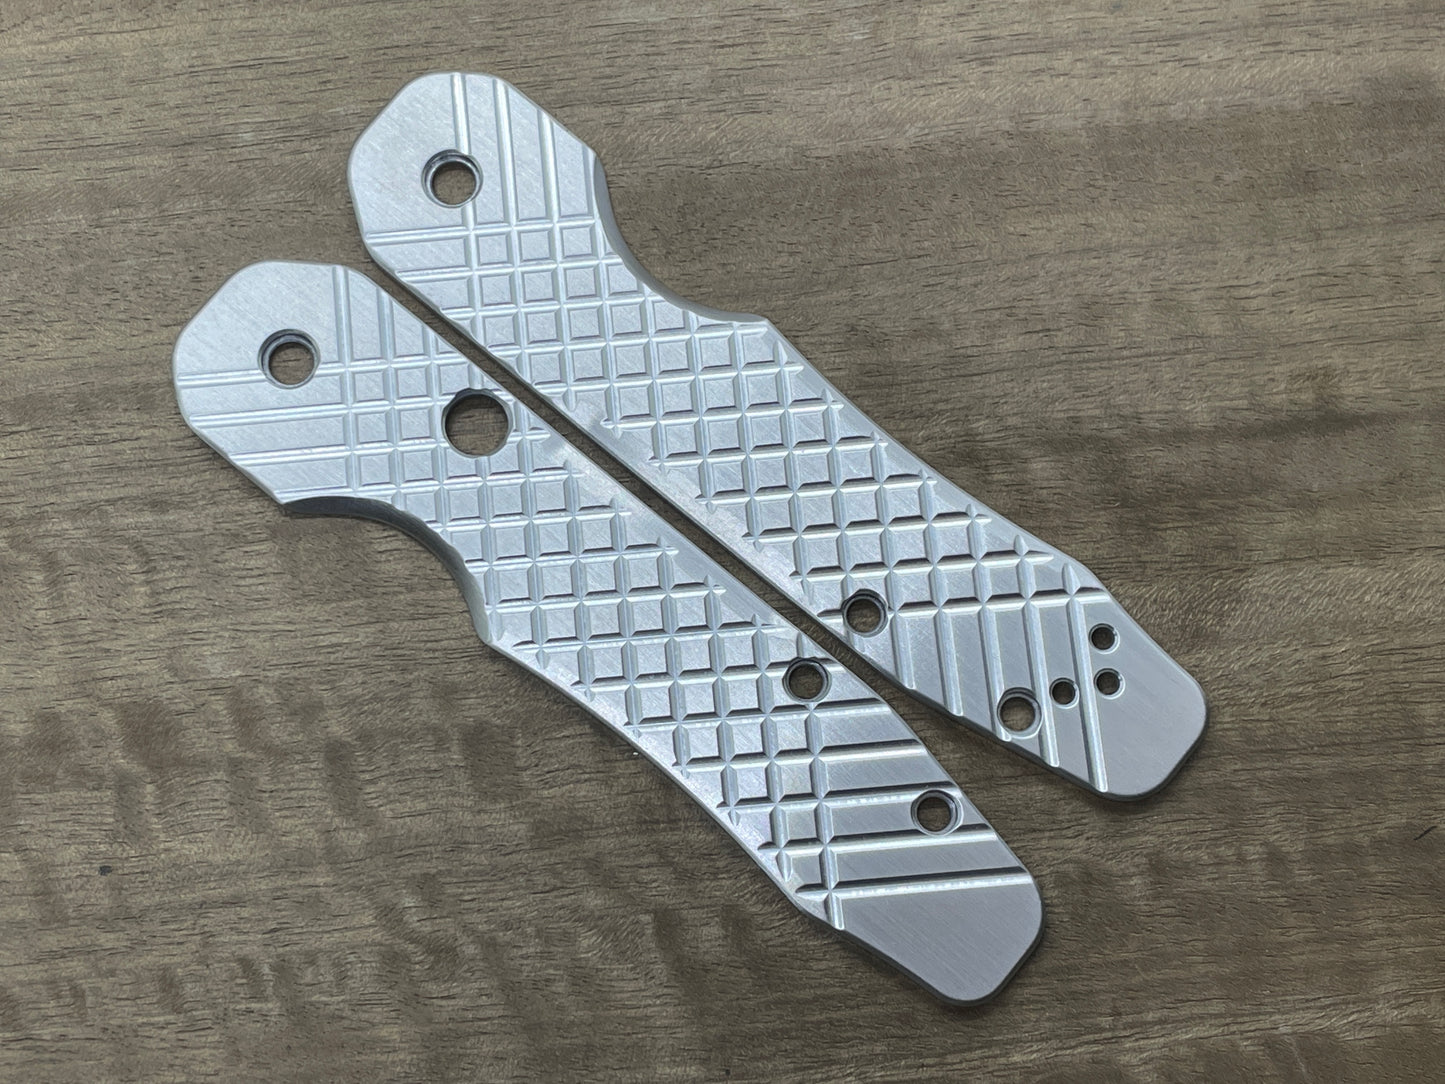 FRAG milled Aerospace Aluminum Scales for Spyderco SMOCK